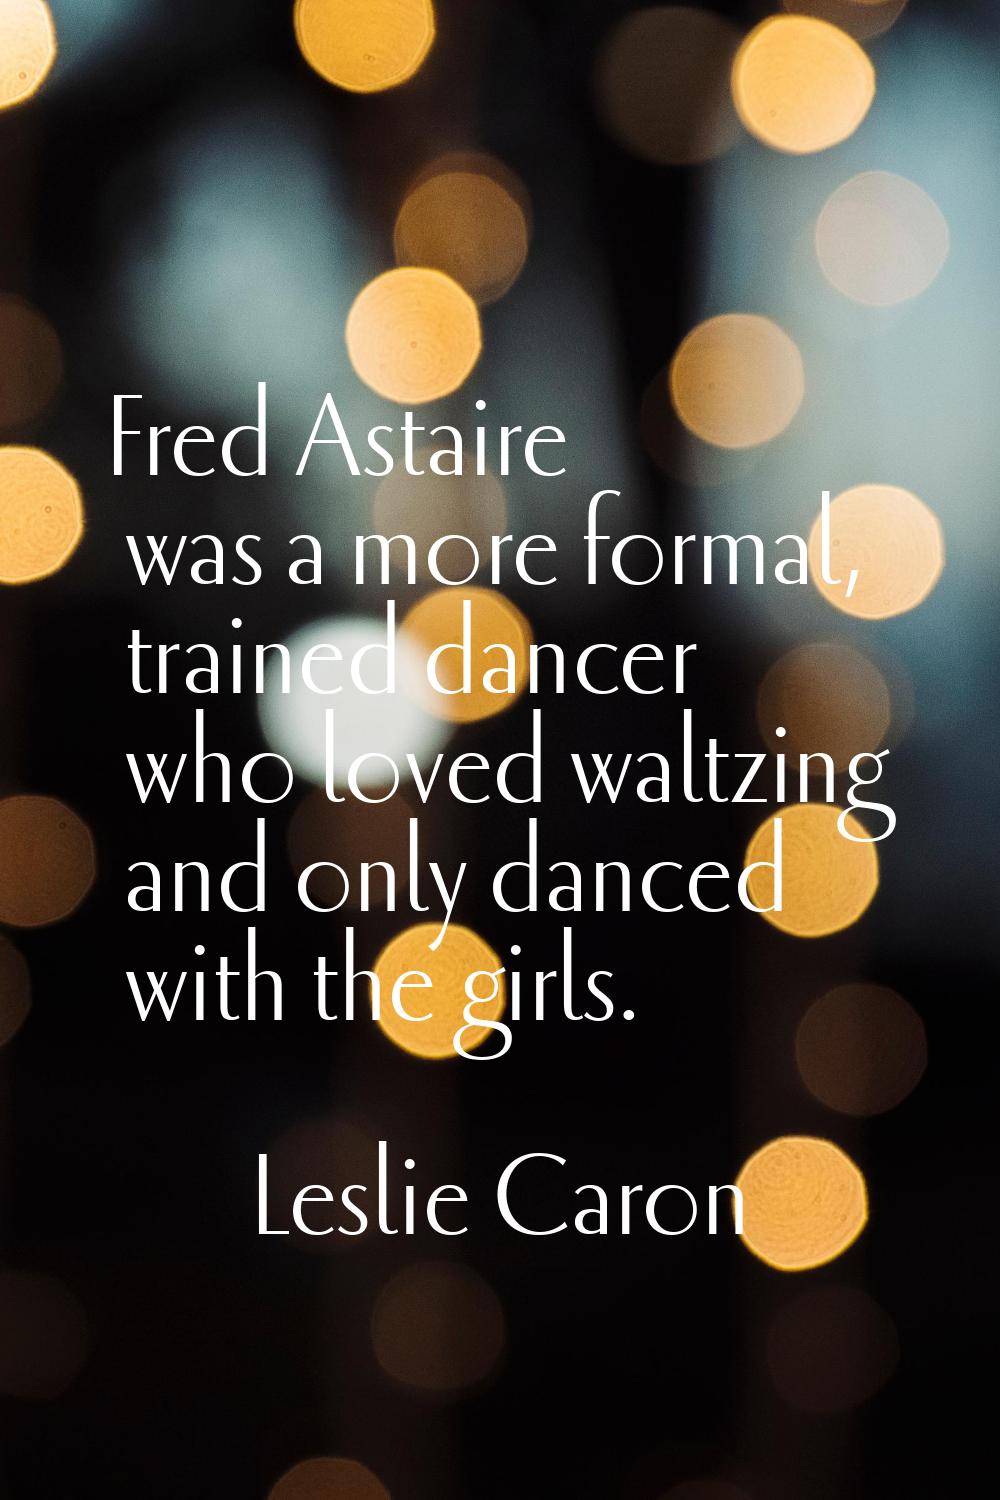 Fred Astaire was a more formal, trained dancer who loved waltzing and only danced with the girls.